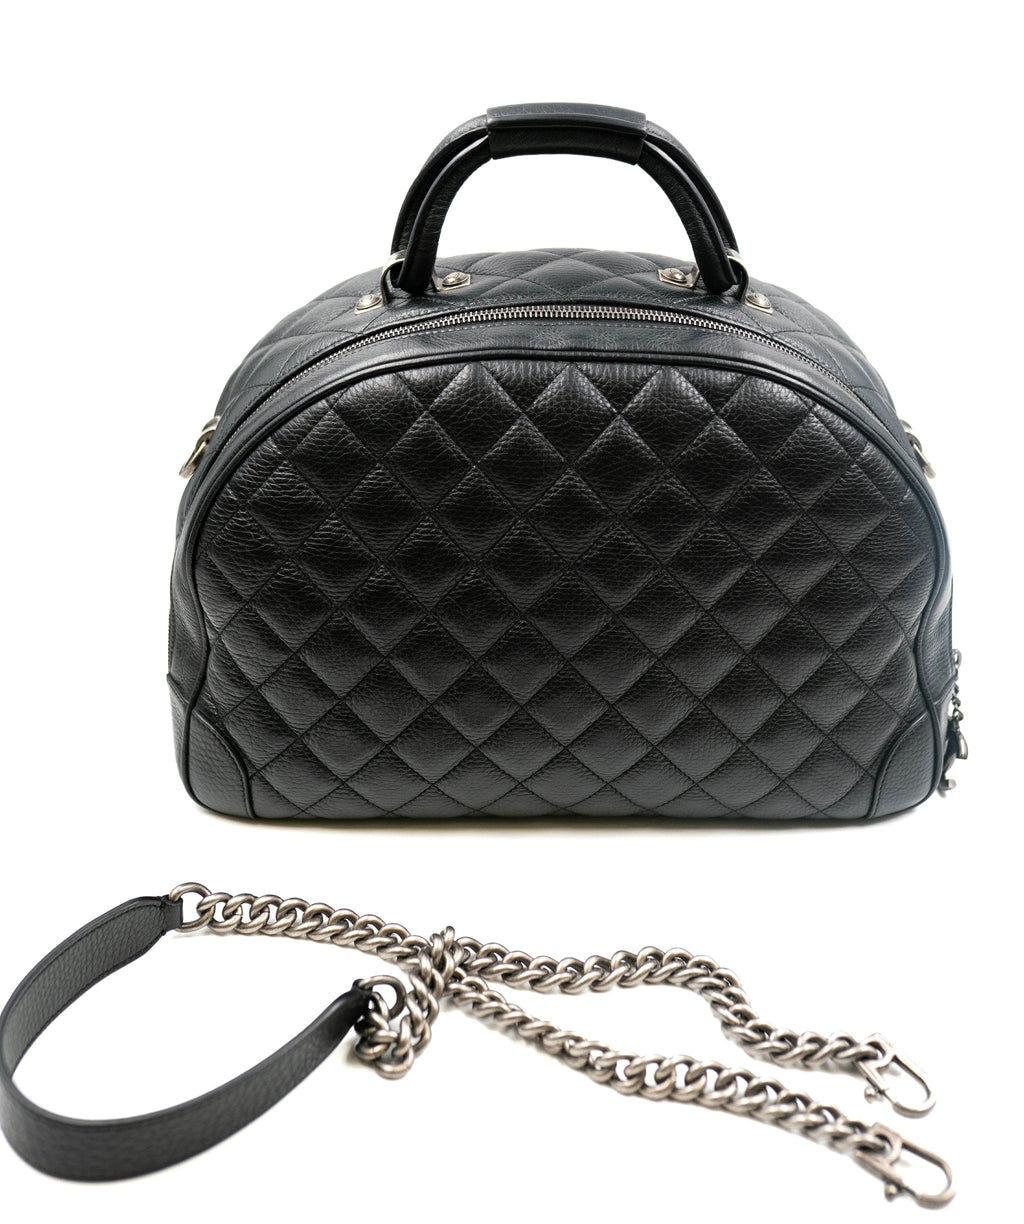 Shop COACH Pillow Madison Quilted Leather Shoulder Bag